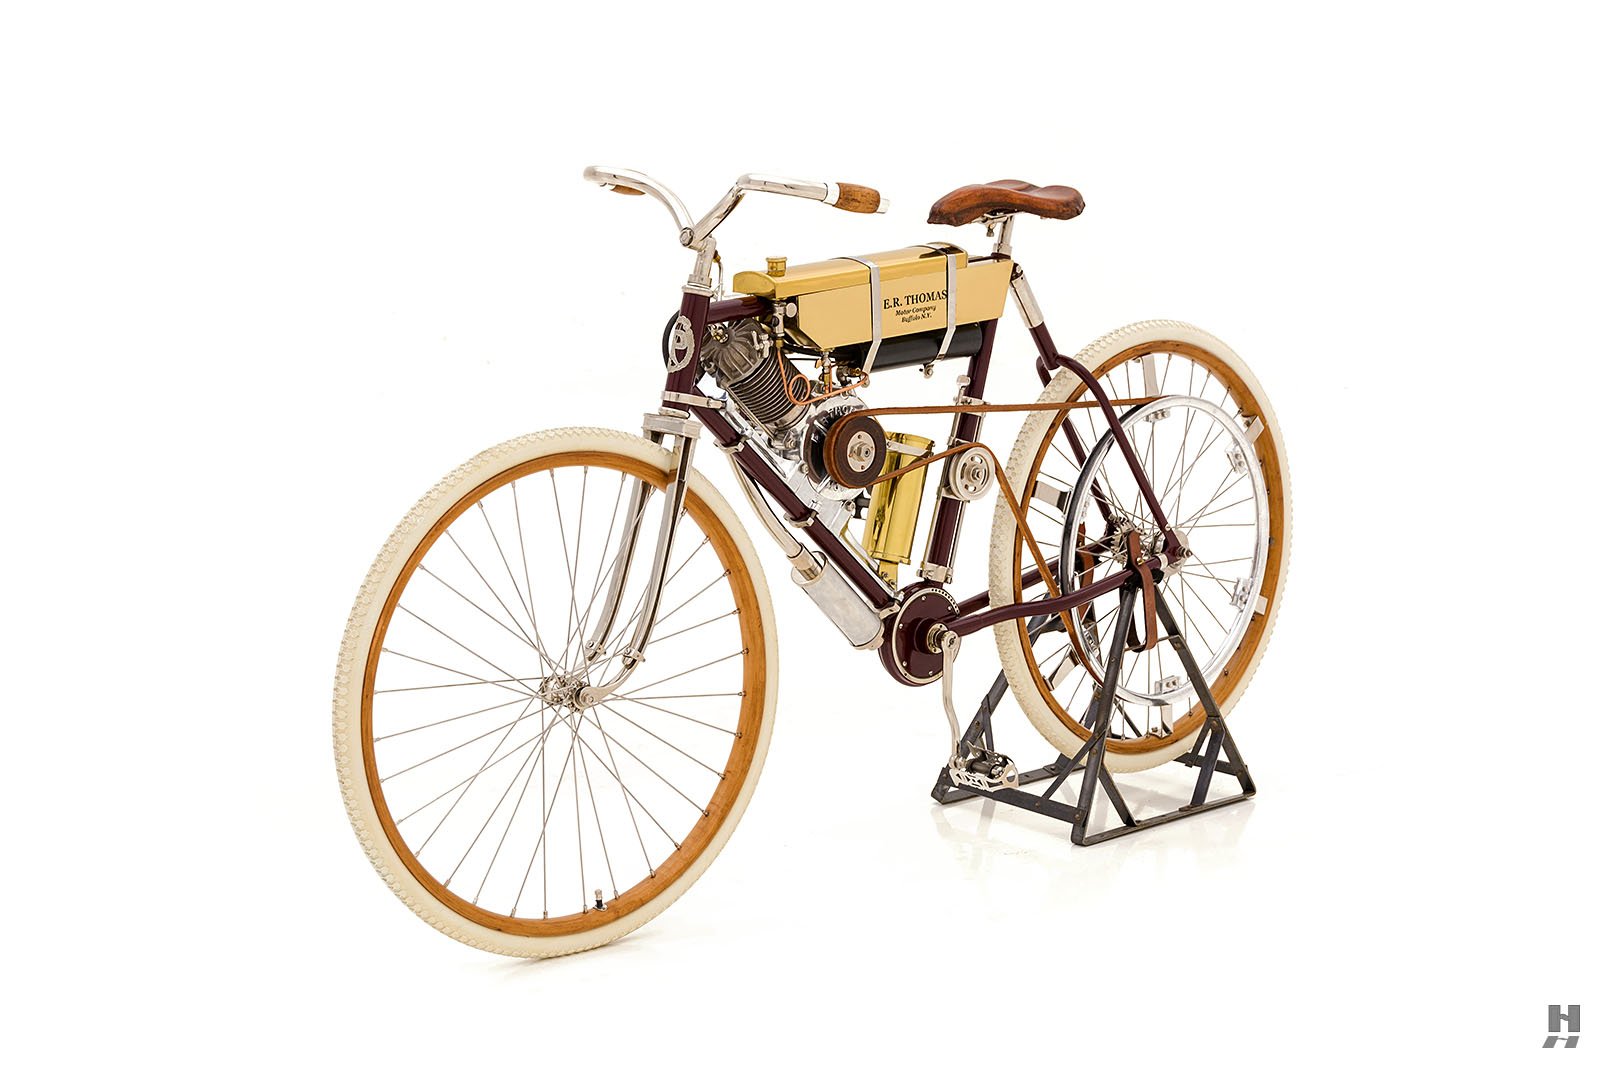 1901 ER Thomas Cycle For Sale | Vintage Driving Machines